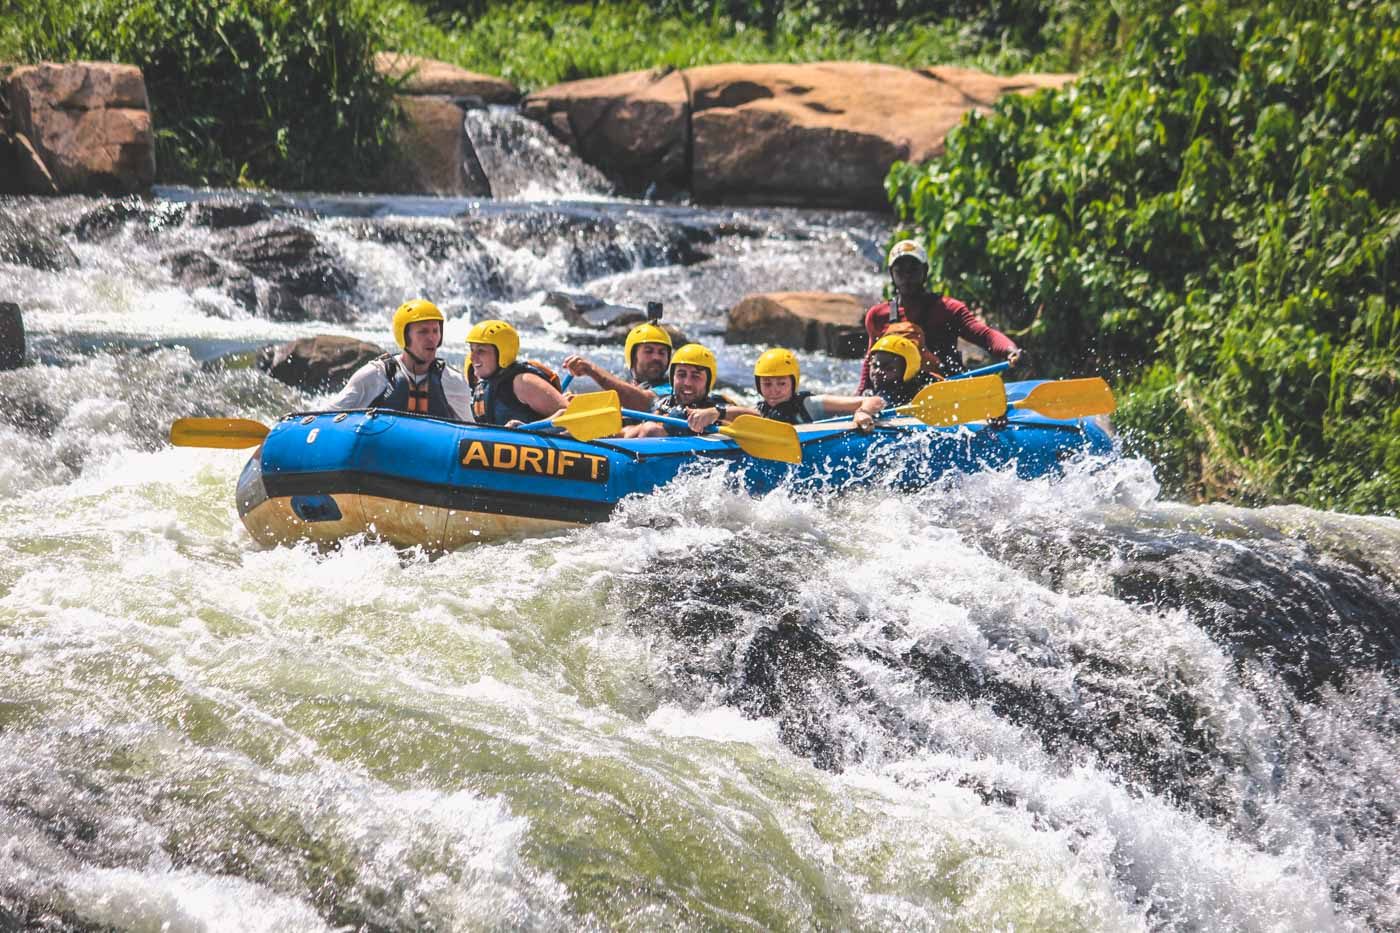 Whitewater rafting on the Nile. Photo by Adrift.